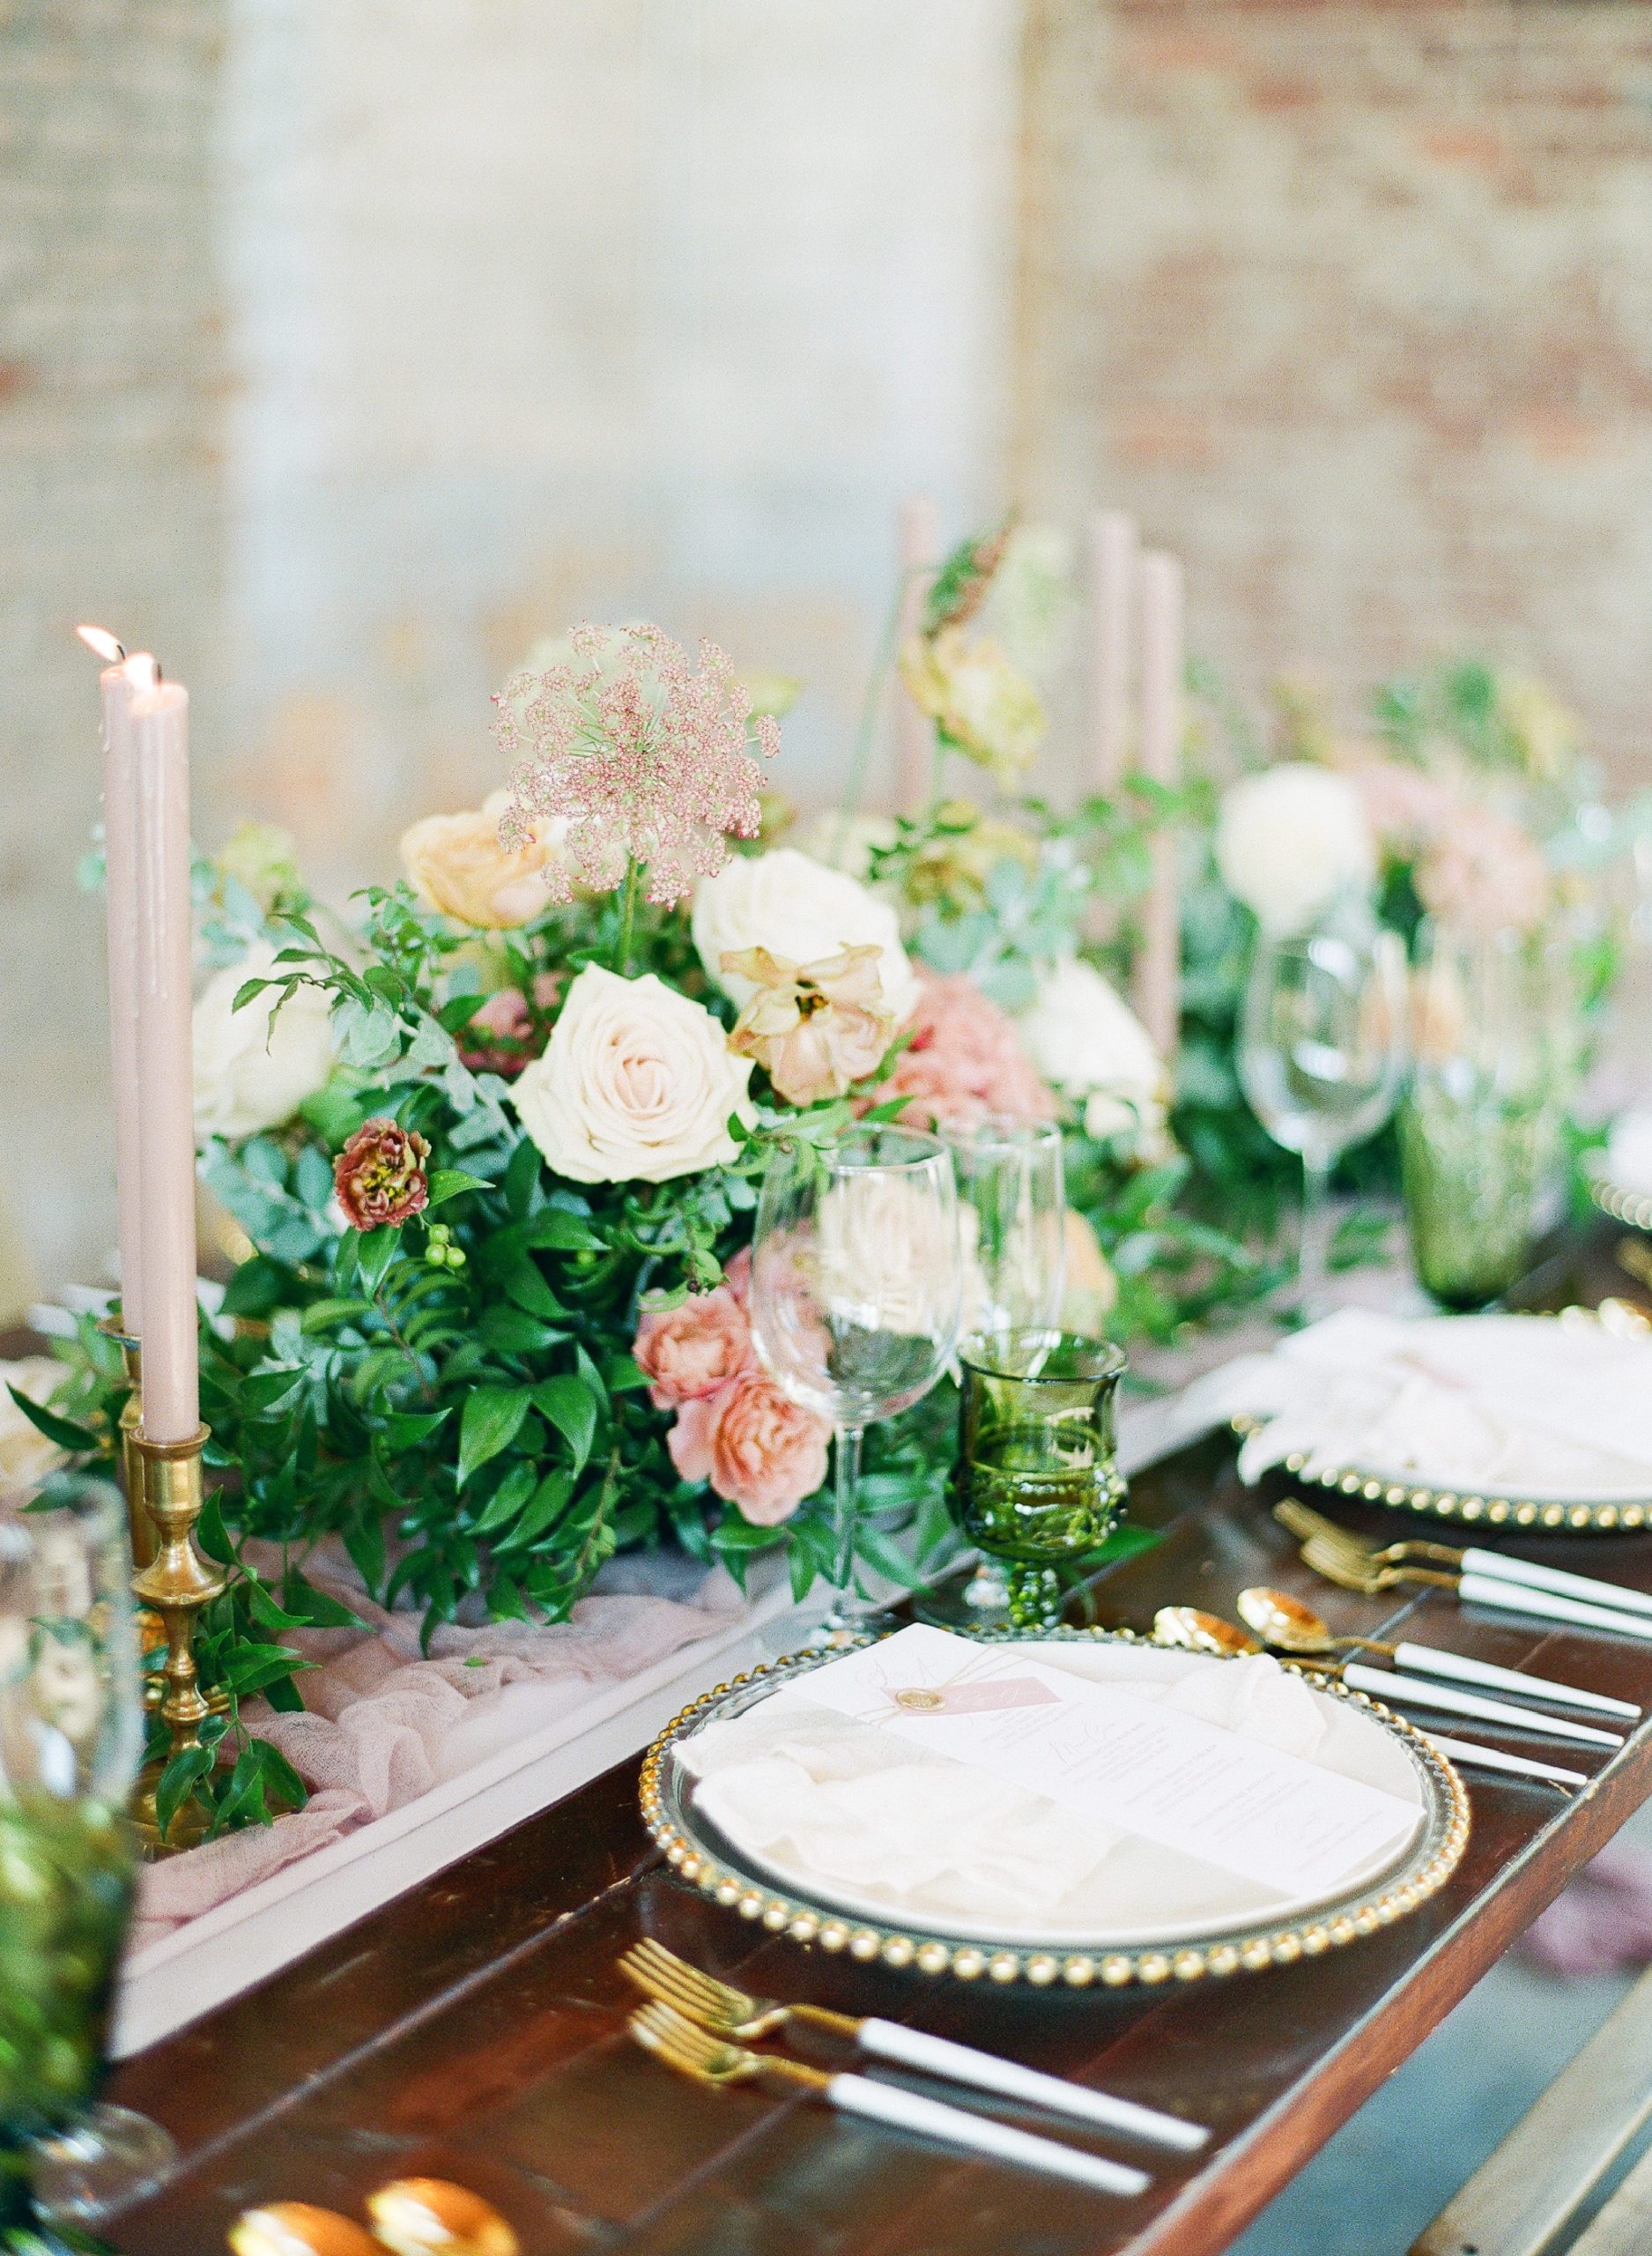 Wedding Reception Table with Pink Candles and Flowers Photo